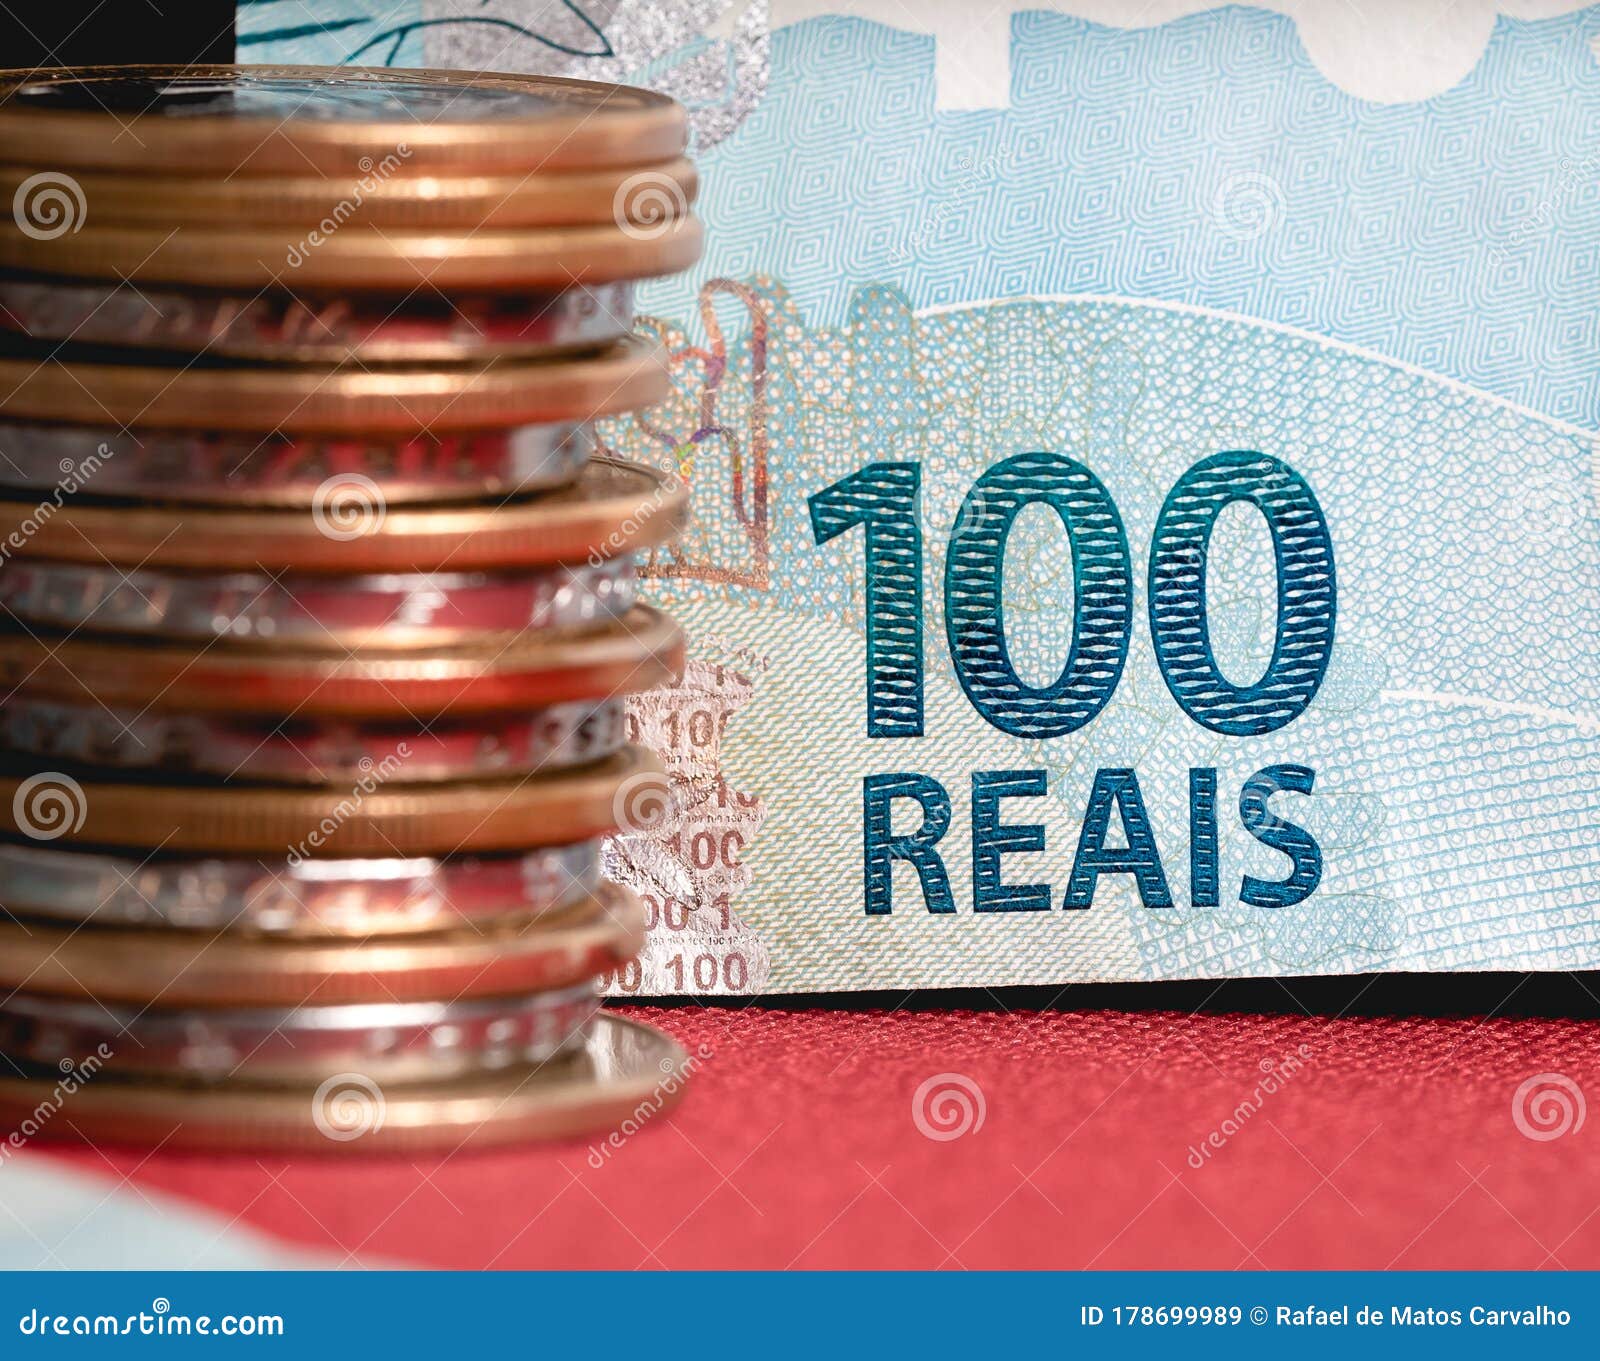 real, money from brazil. currency, dinheiro, brasil, reais.